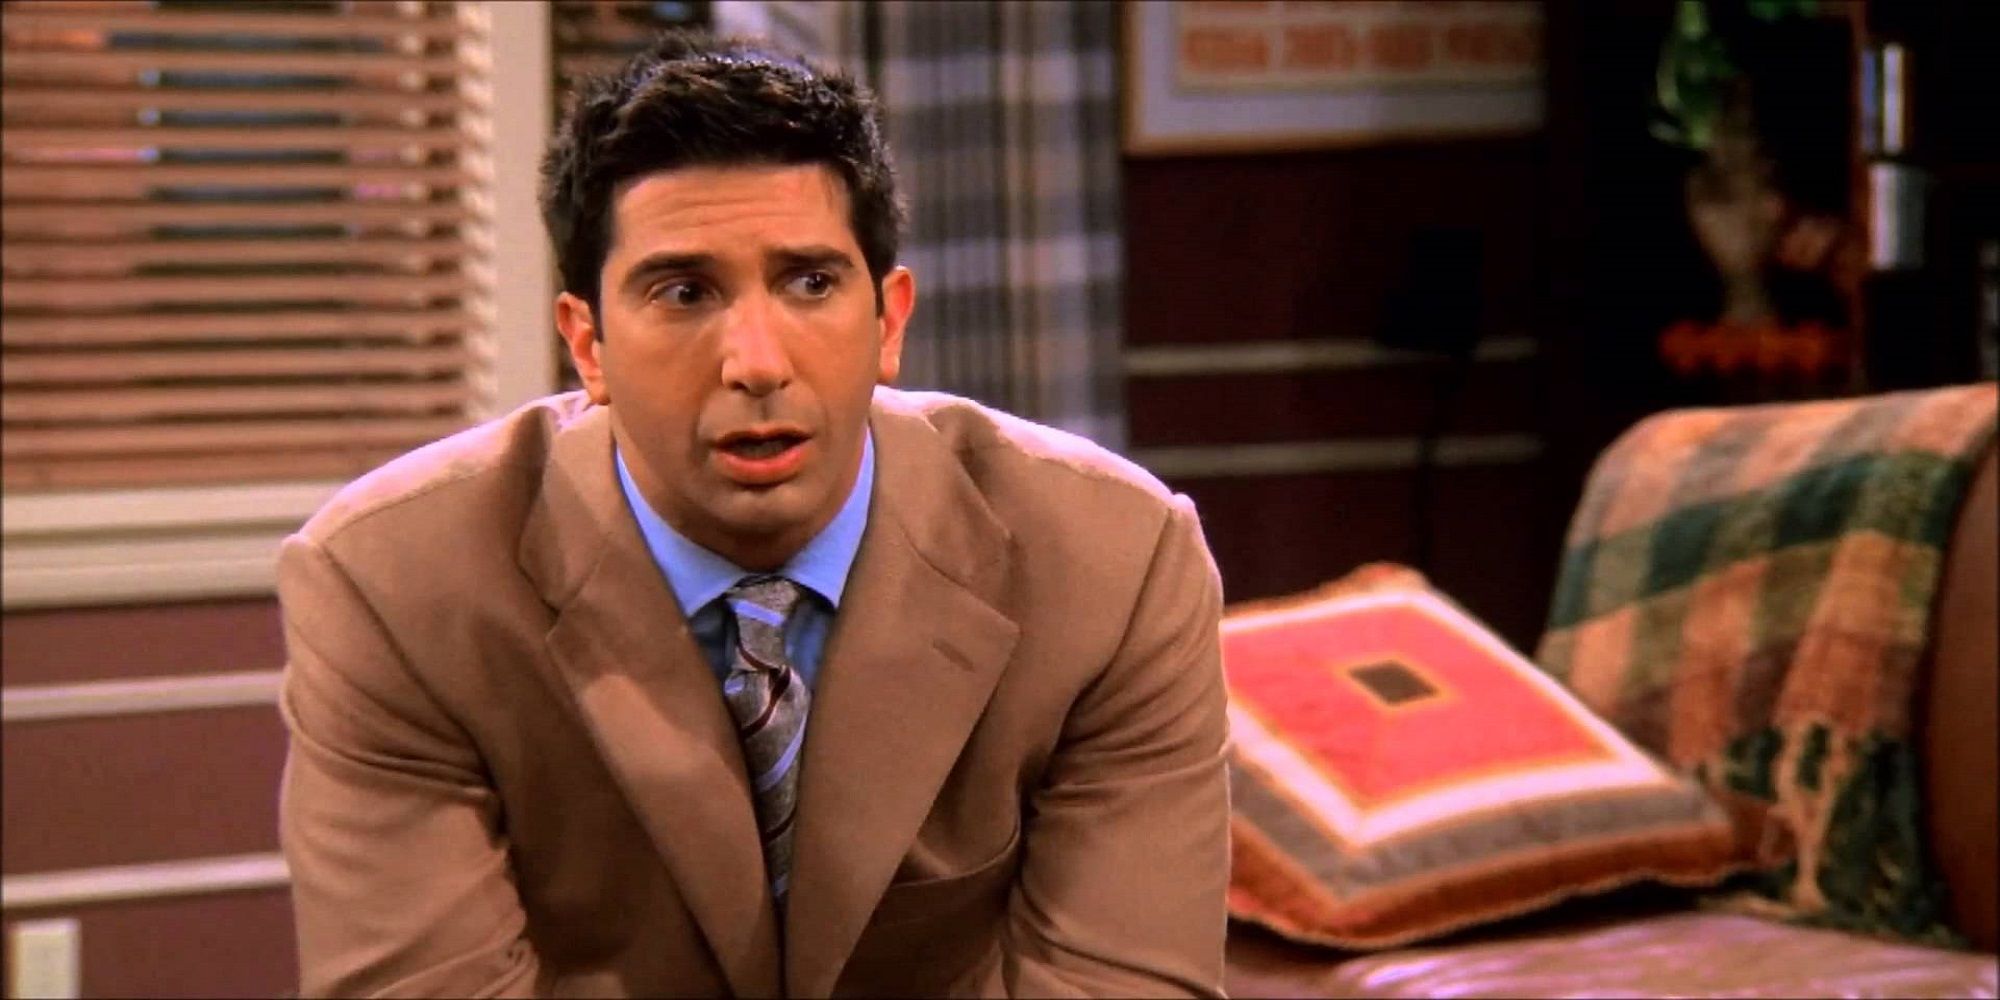 Ross shocked after finding Rachel is pregnant in Friends